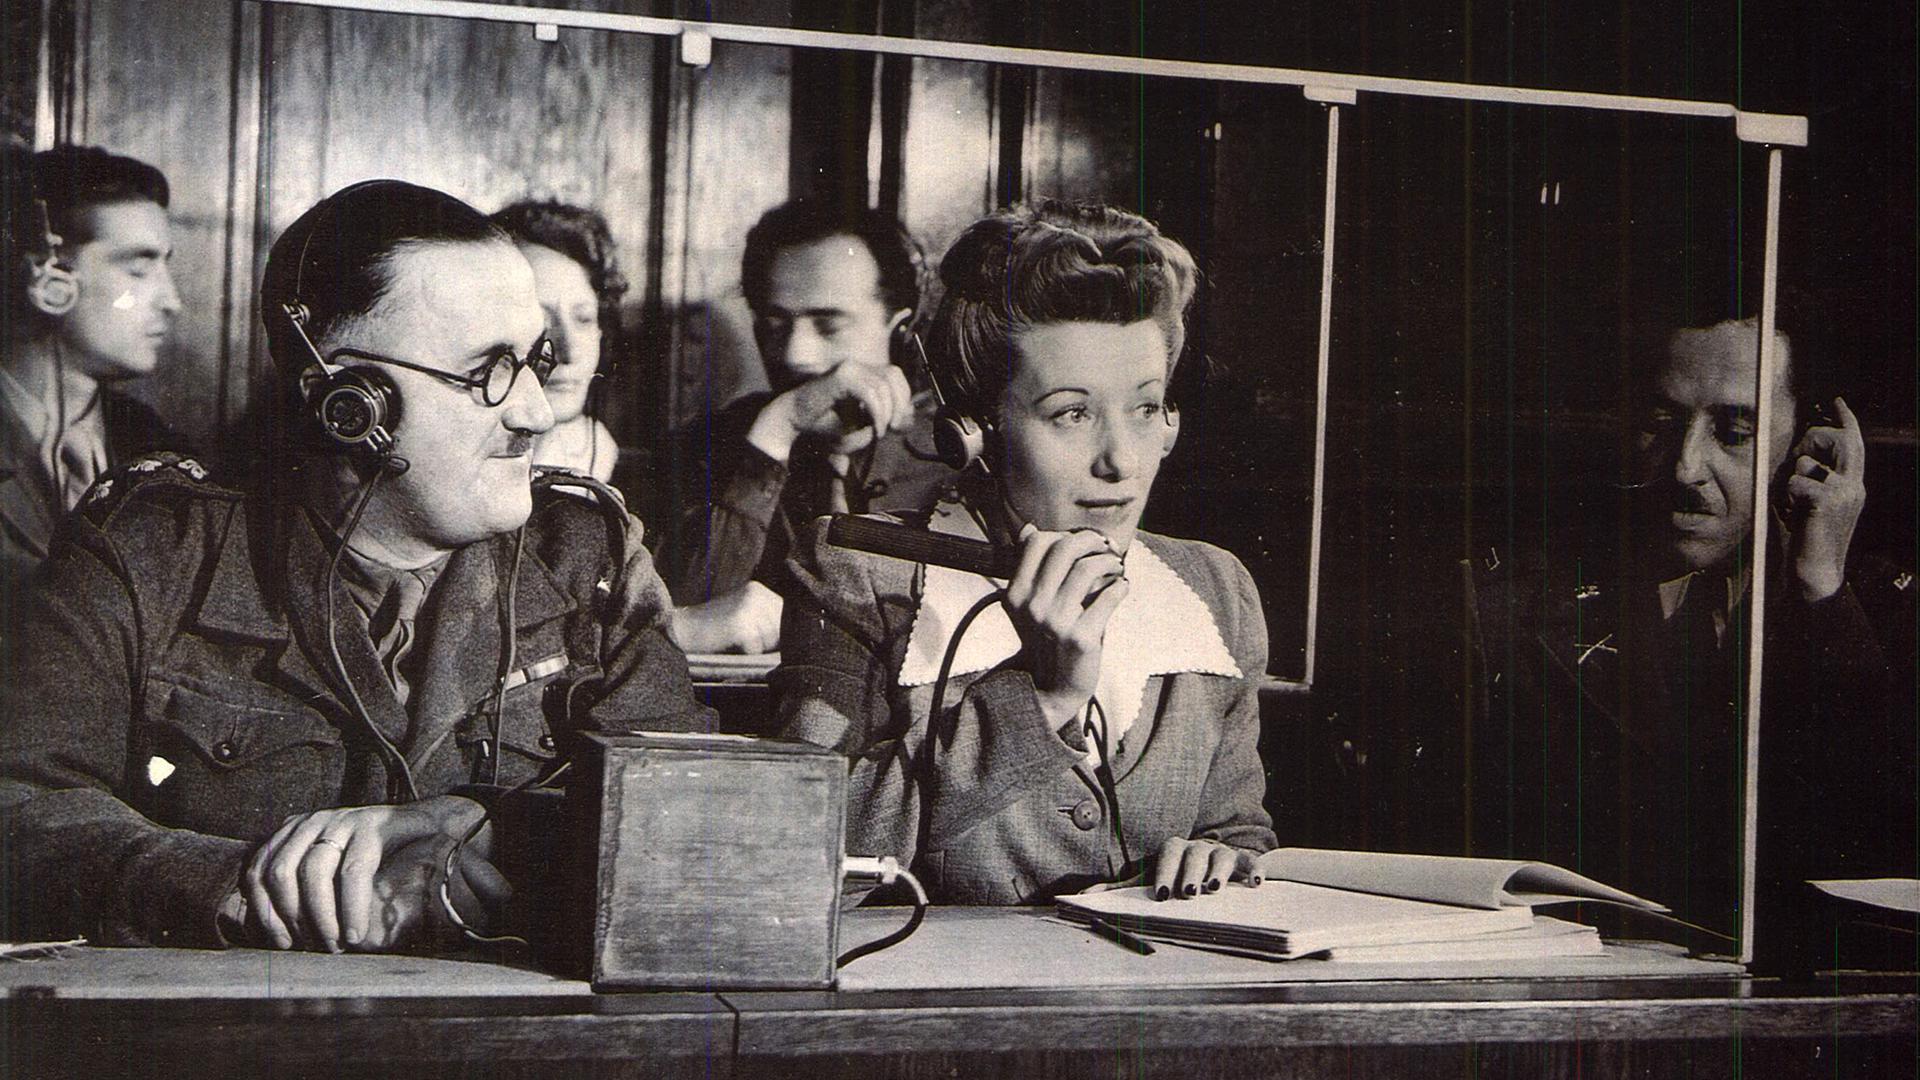 The interpreters' booth at the Nuremberg trials. From left to right: Capt. Macintosh, British Army, translates from French into English; Miss Margot Bortlin, translates from German into English; Lt. Ernest Peter Uiberall, Monitor. 